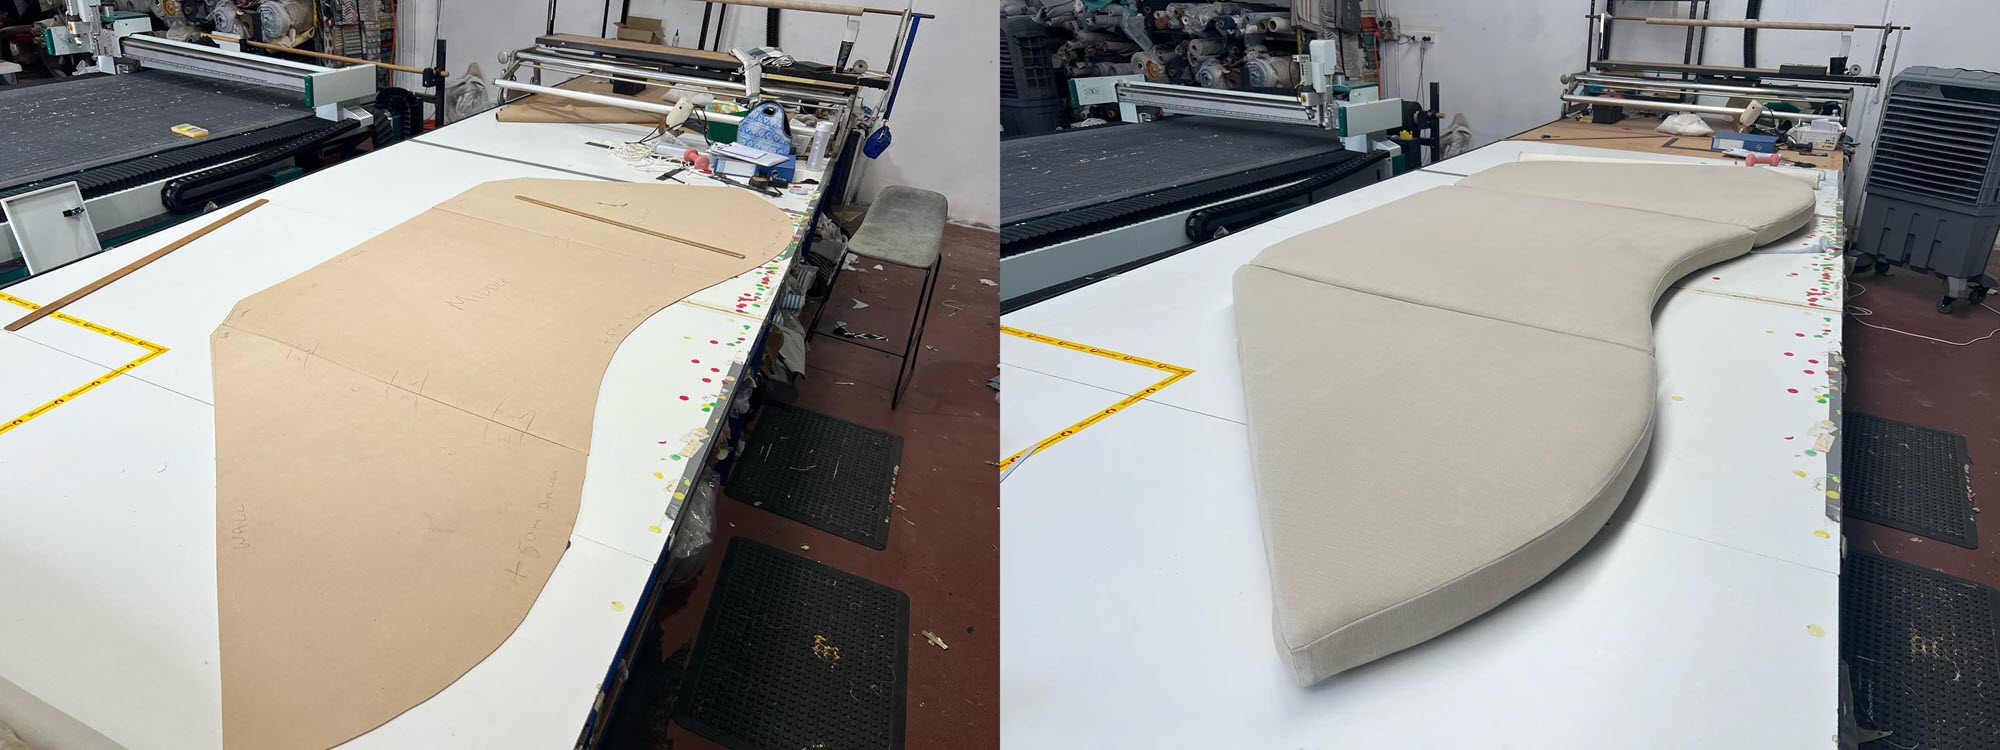 Replacement couch cushions being manufactured, before and after.